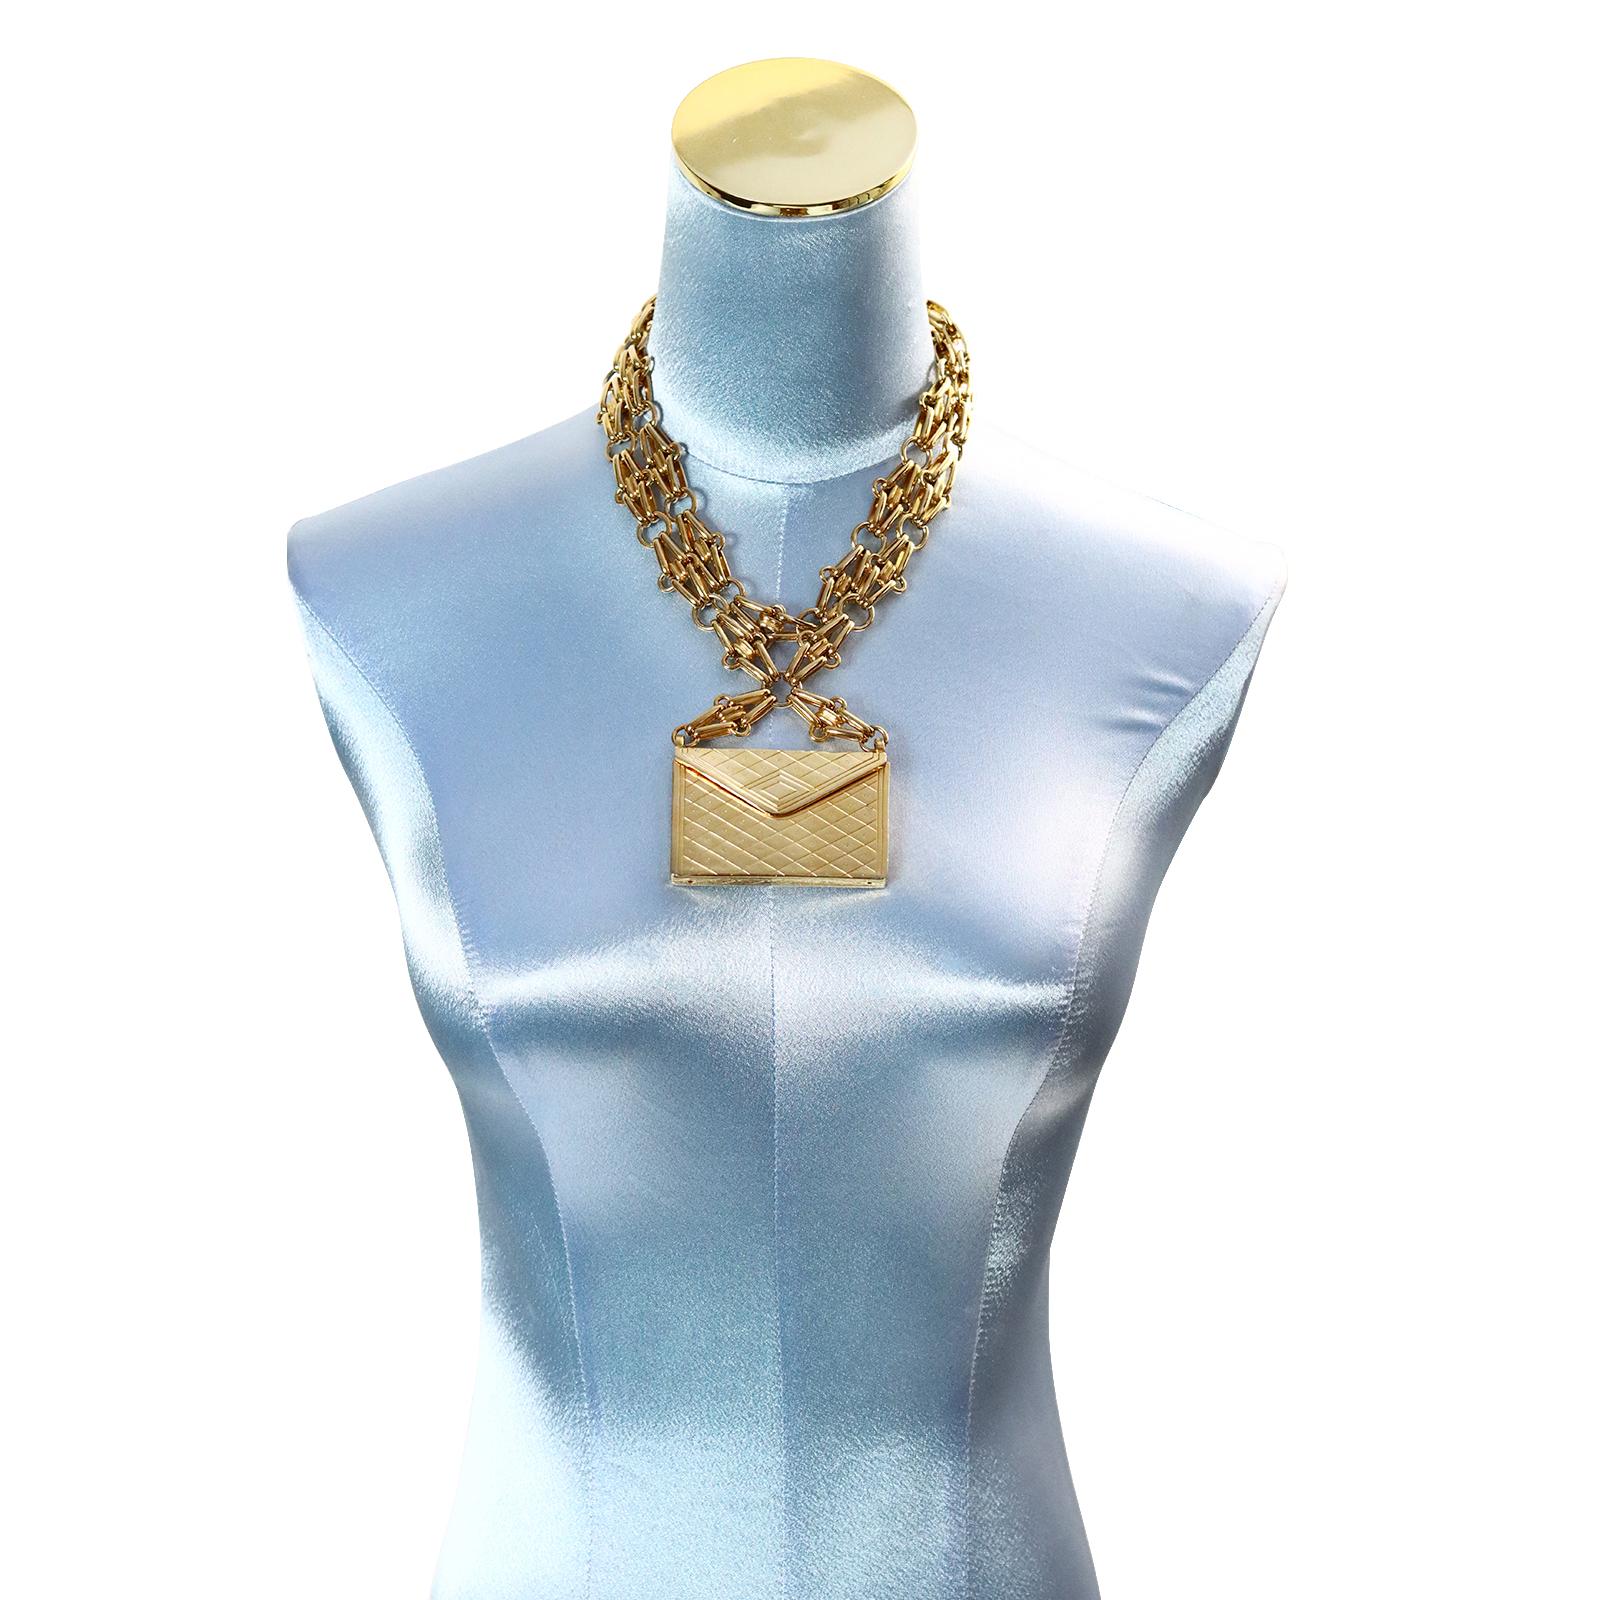 Vintage Carolee Gold Tone Long Purse Necklace Circa 1980s. This looks great doubled or worn one piece against the neck.  Right in style today with the micro mini bags.  Only it is 40 years later. Such a talking point.
 The necklace portion is 34